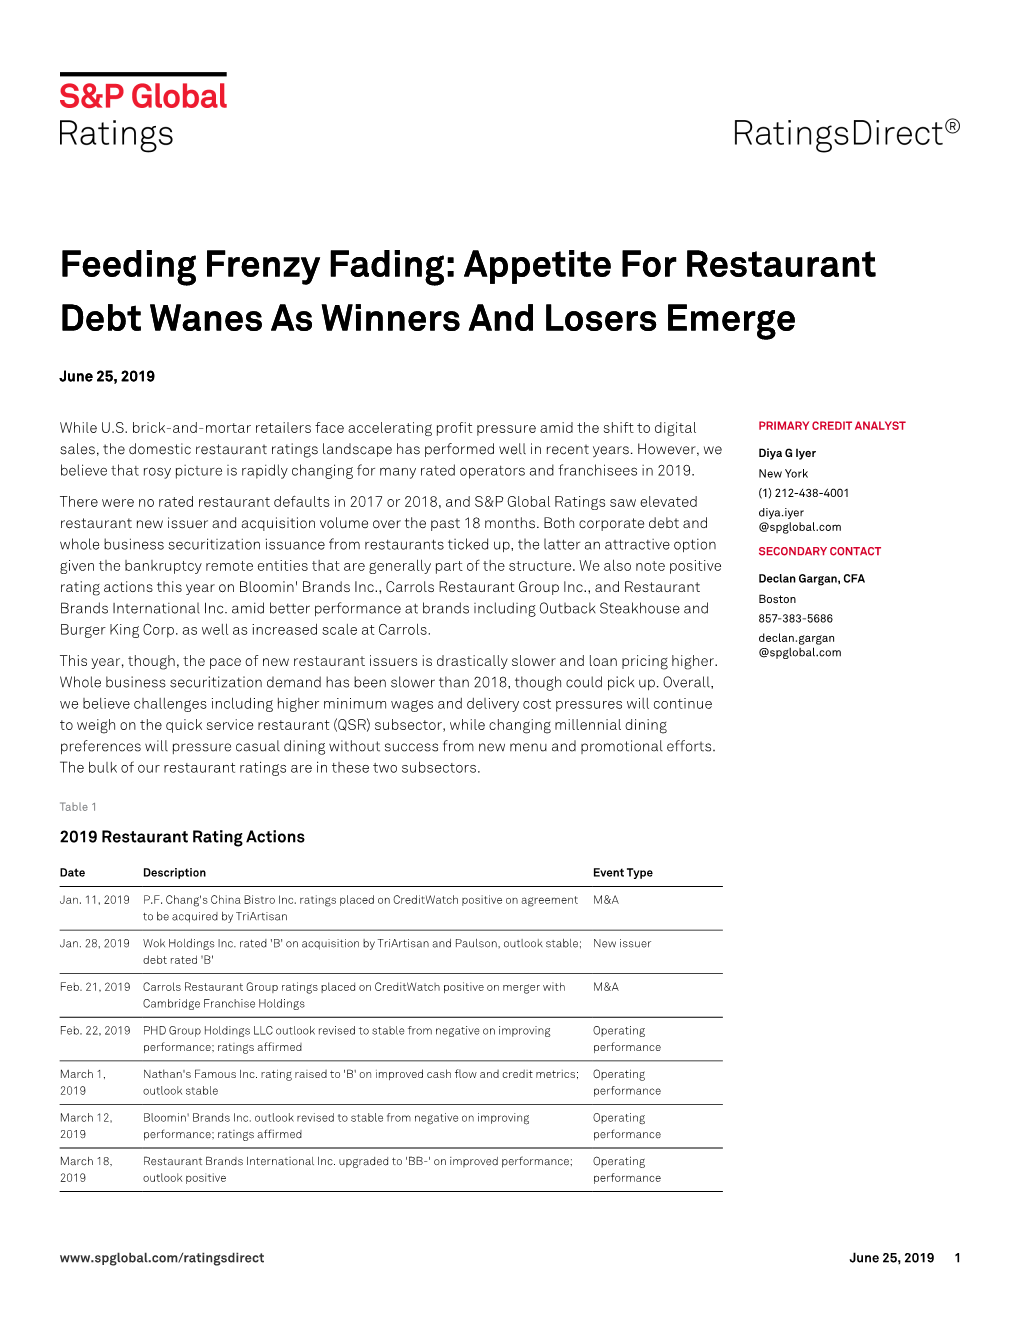 Appetite for Restaurant Debt Wanes As Winners and Losers Emerge Feeding Frenzy Fading